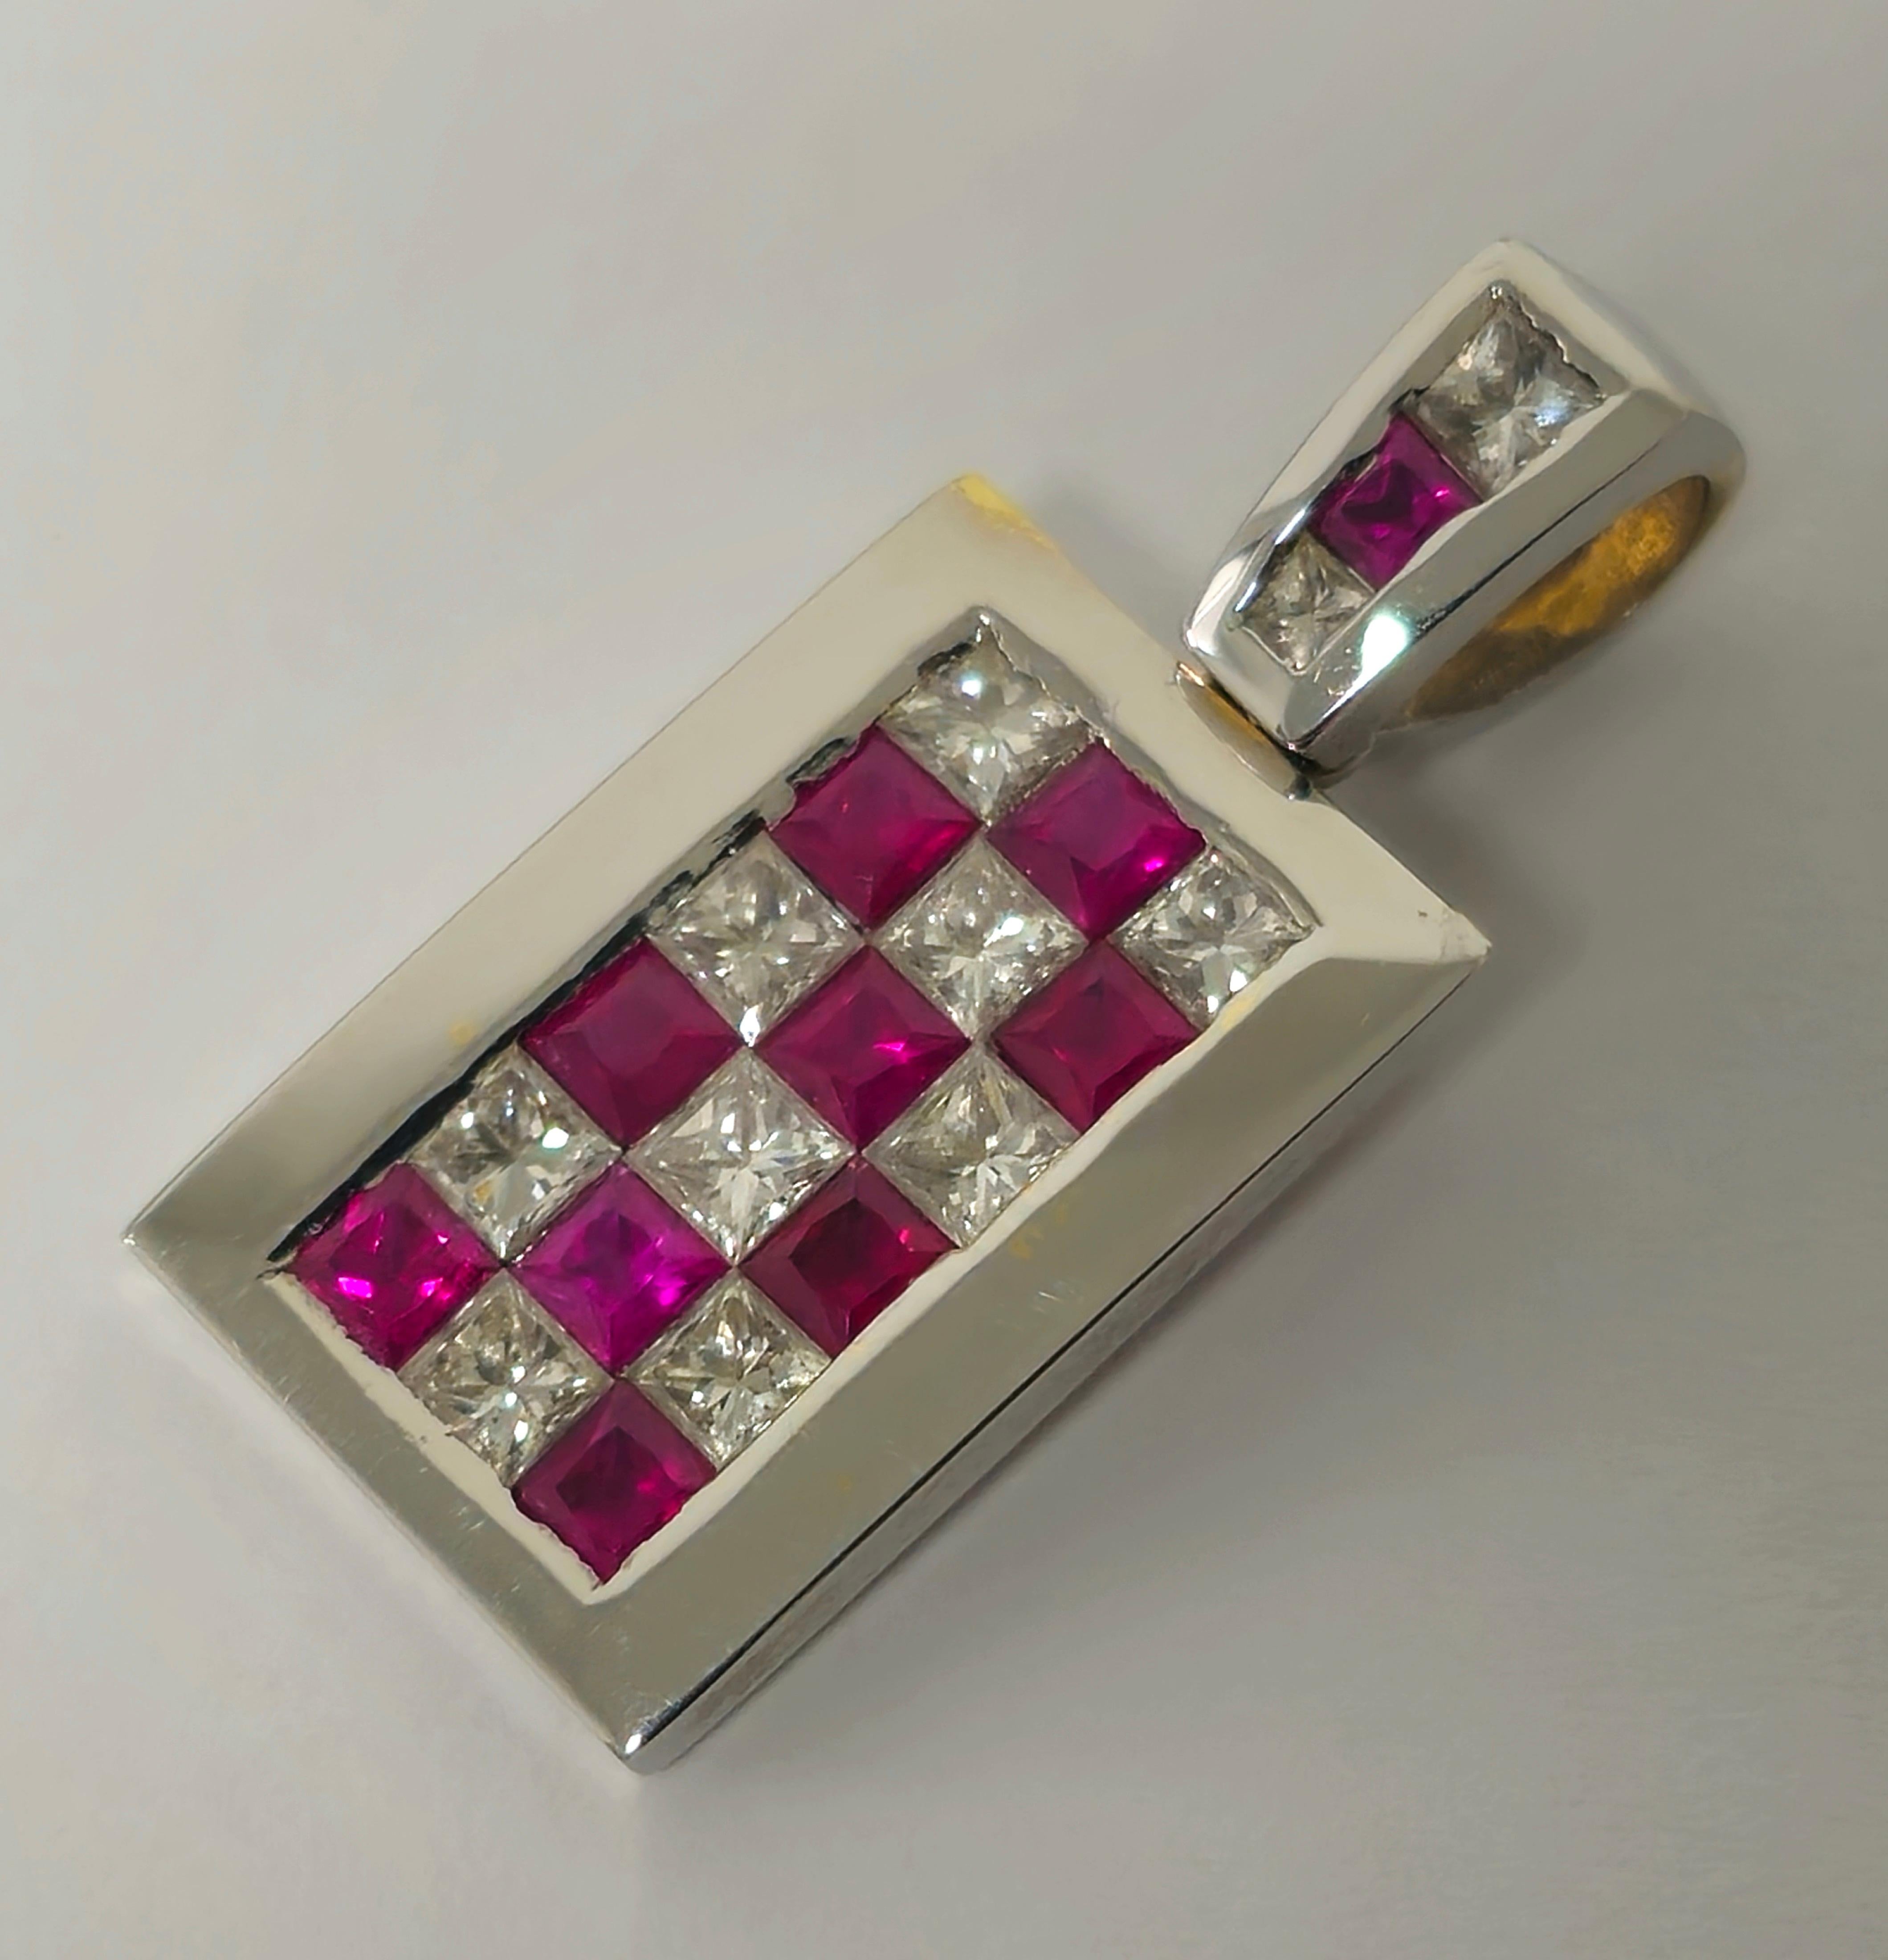 Elevate your elegance with our stunning 18K White Gold Pendant, adorned with 1.00 Carat Princess Cut Diamonds and a brilliant 1.00 Carat Burma Ruby. Each gemstone, including the VVS Diamonds and high-quality Ruby, exudes natural beauty and